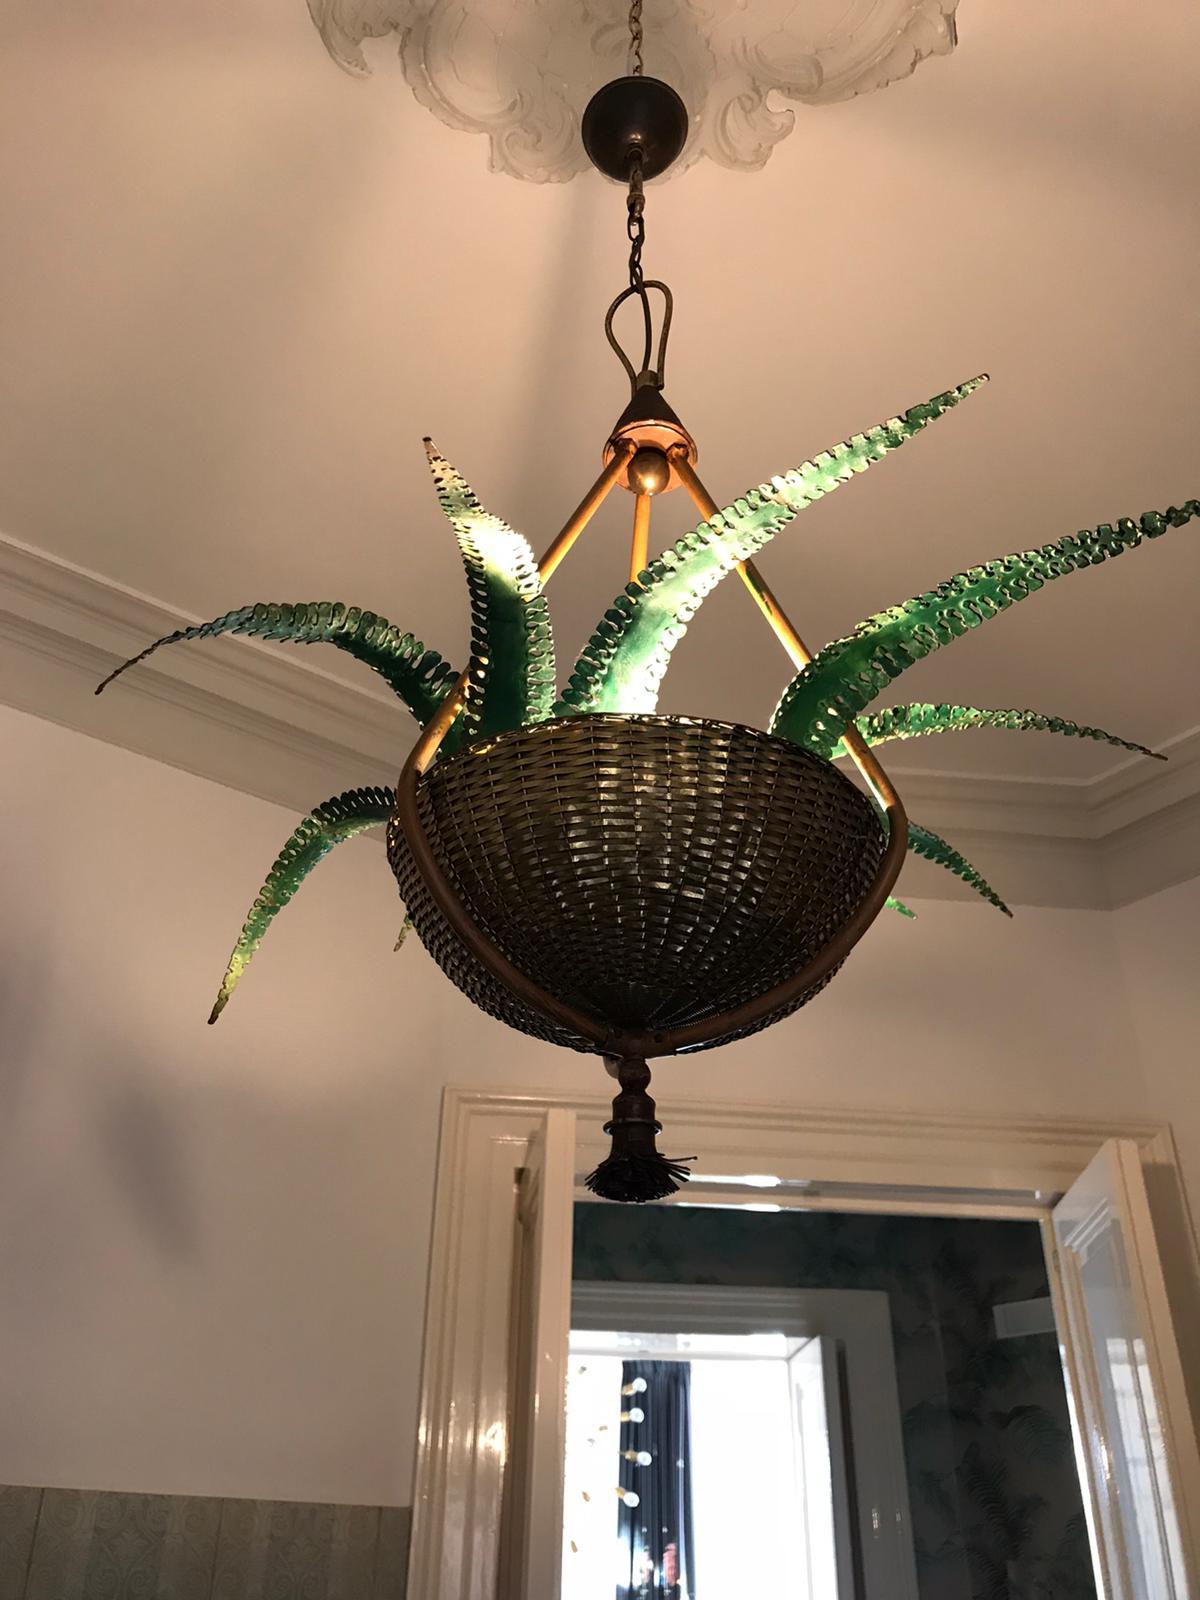 Vintage Italian chandelier with leaves made of painted metal and brass basket Manufactured by Banci Firenze, circa 1960s, Made in Italy.